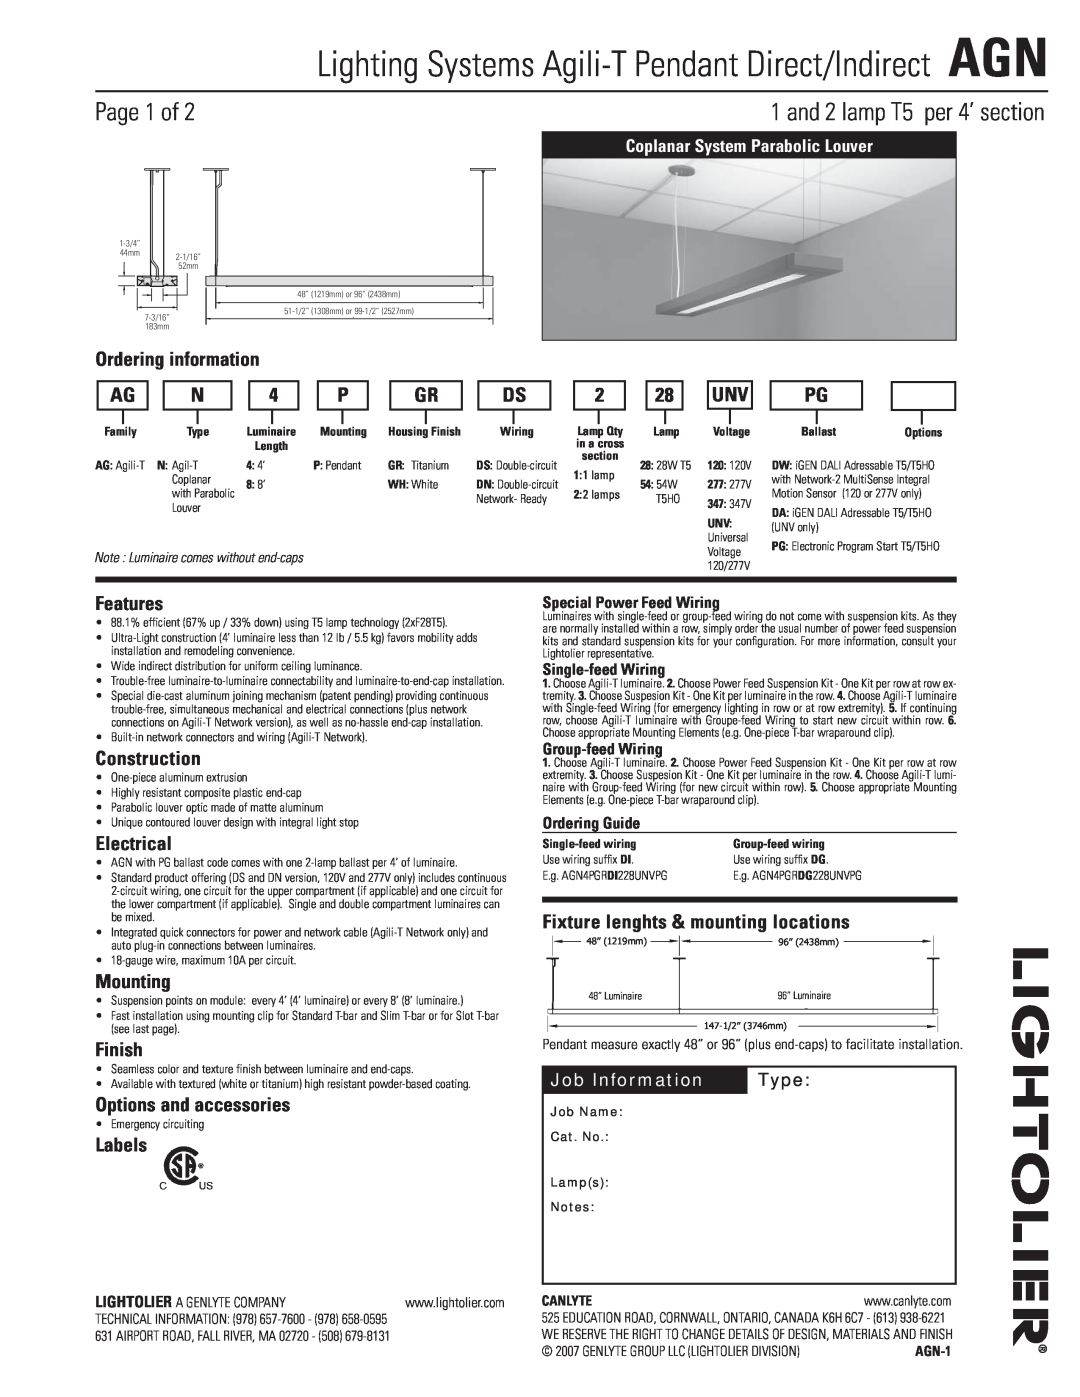 Lightolier AGN manual Page 1 of, and 2 lamp T5 per 4’ section 